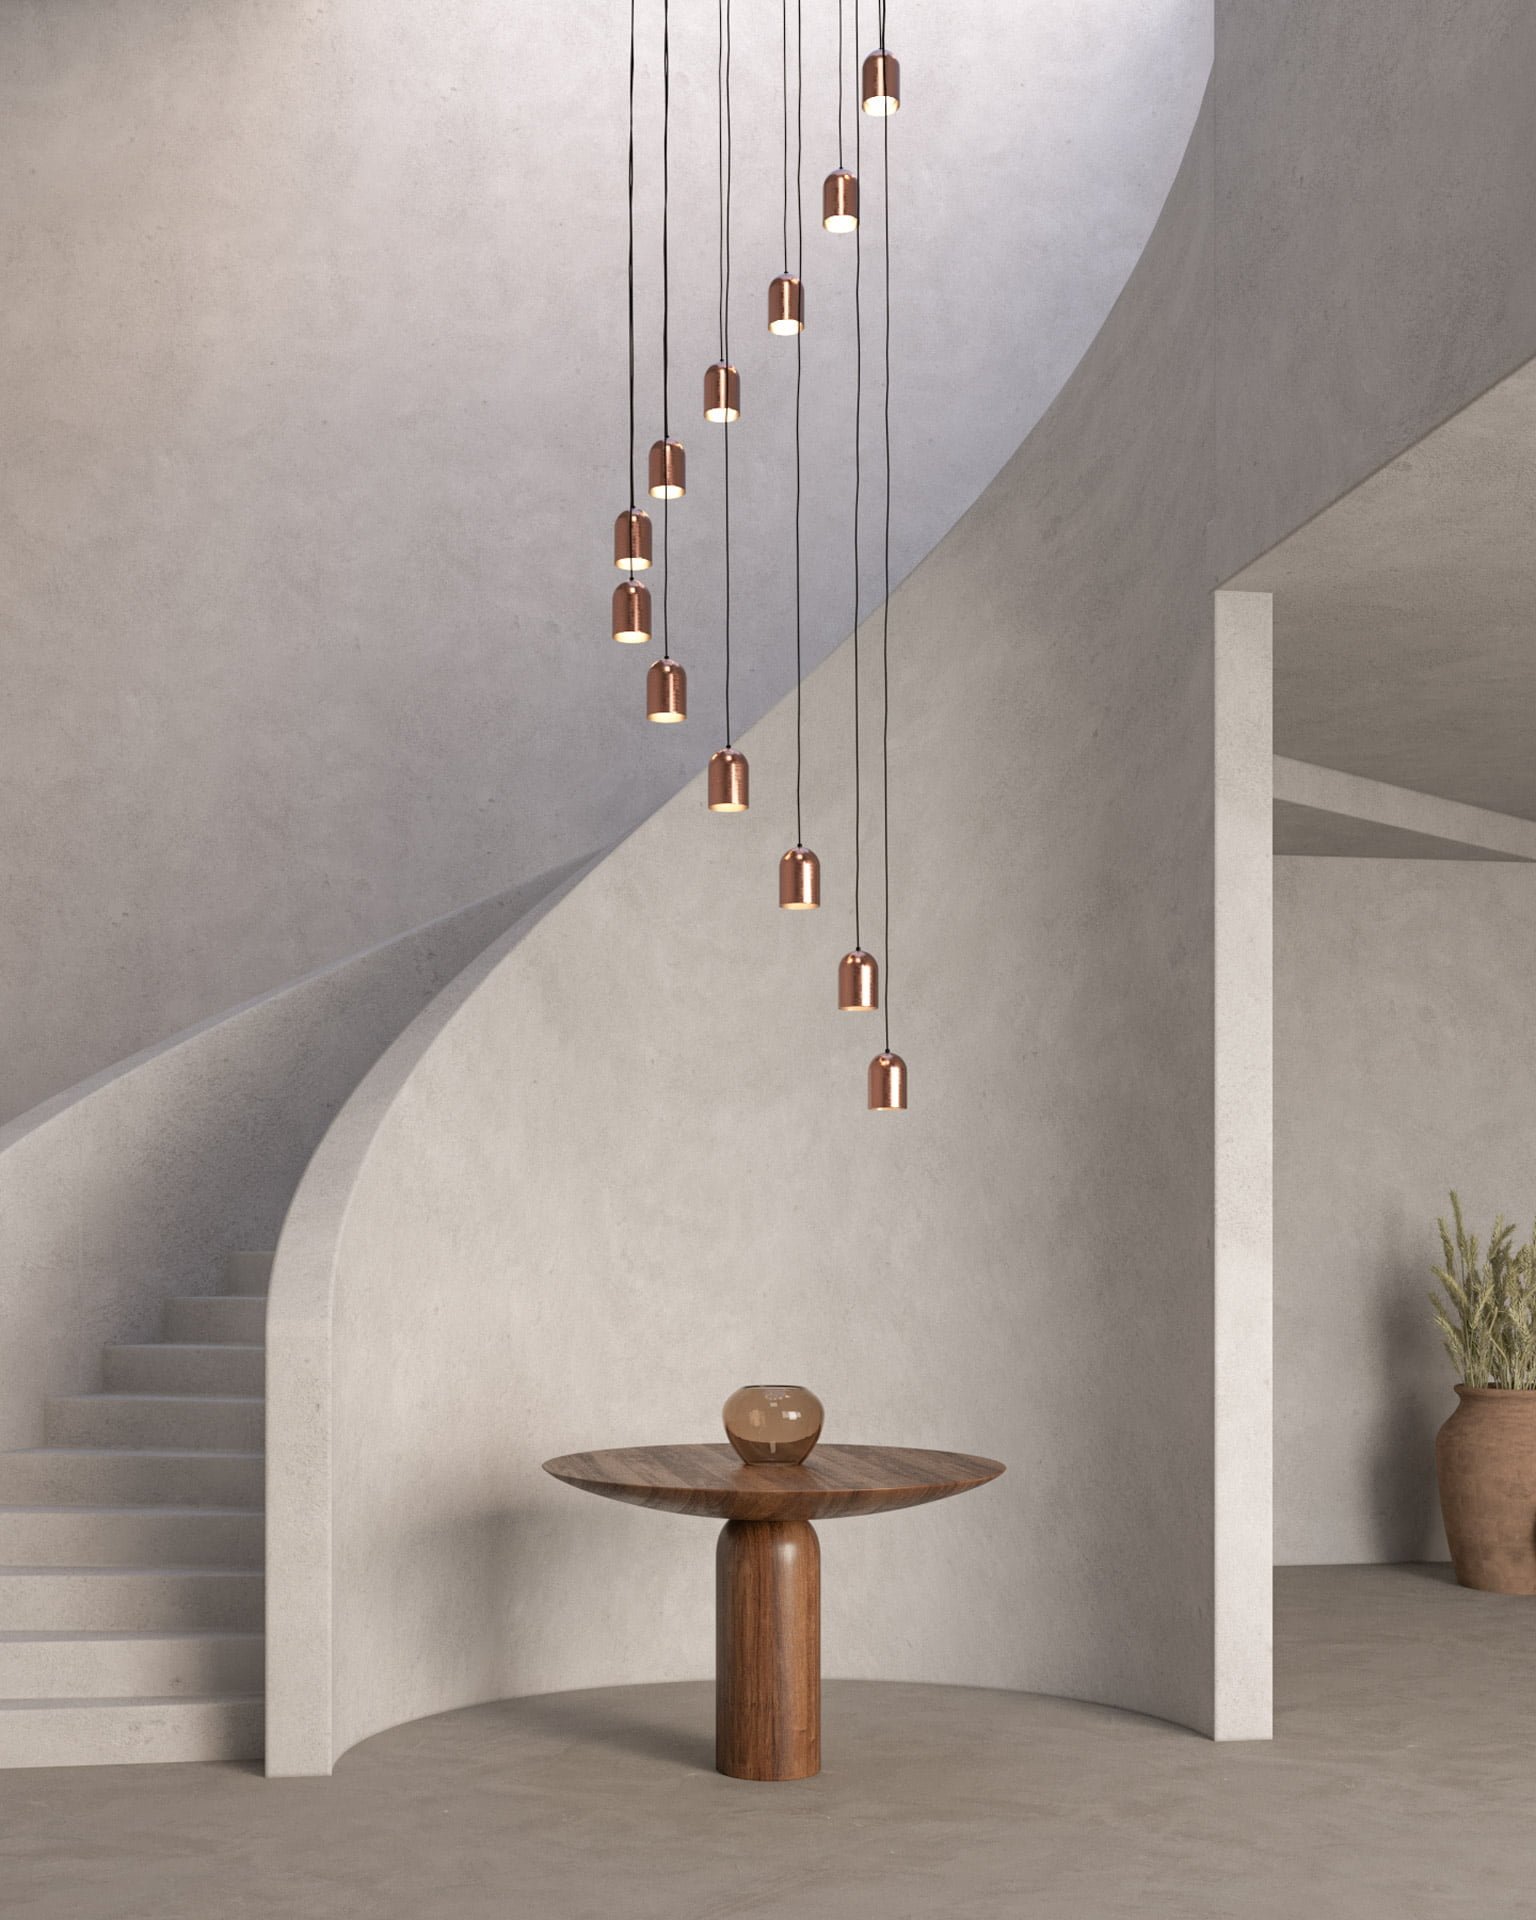 Pendant lamp for interior made of brush cooper in stairs o loby